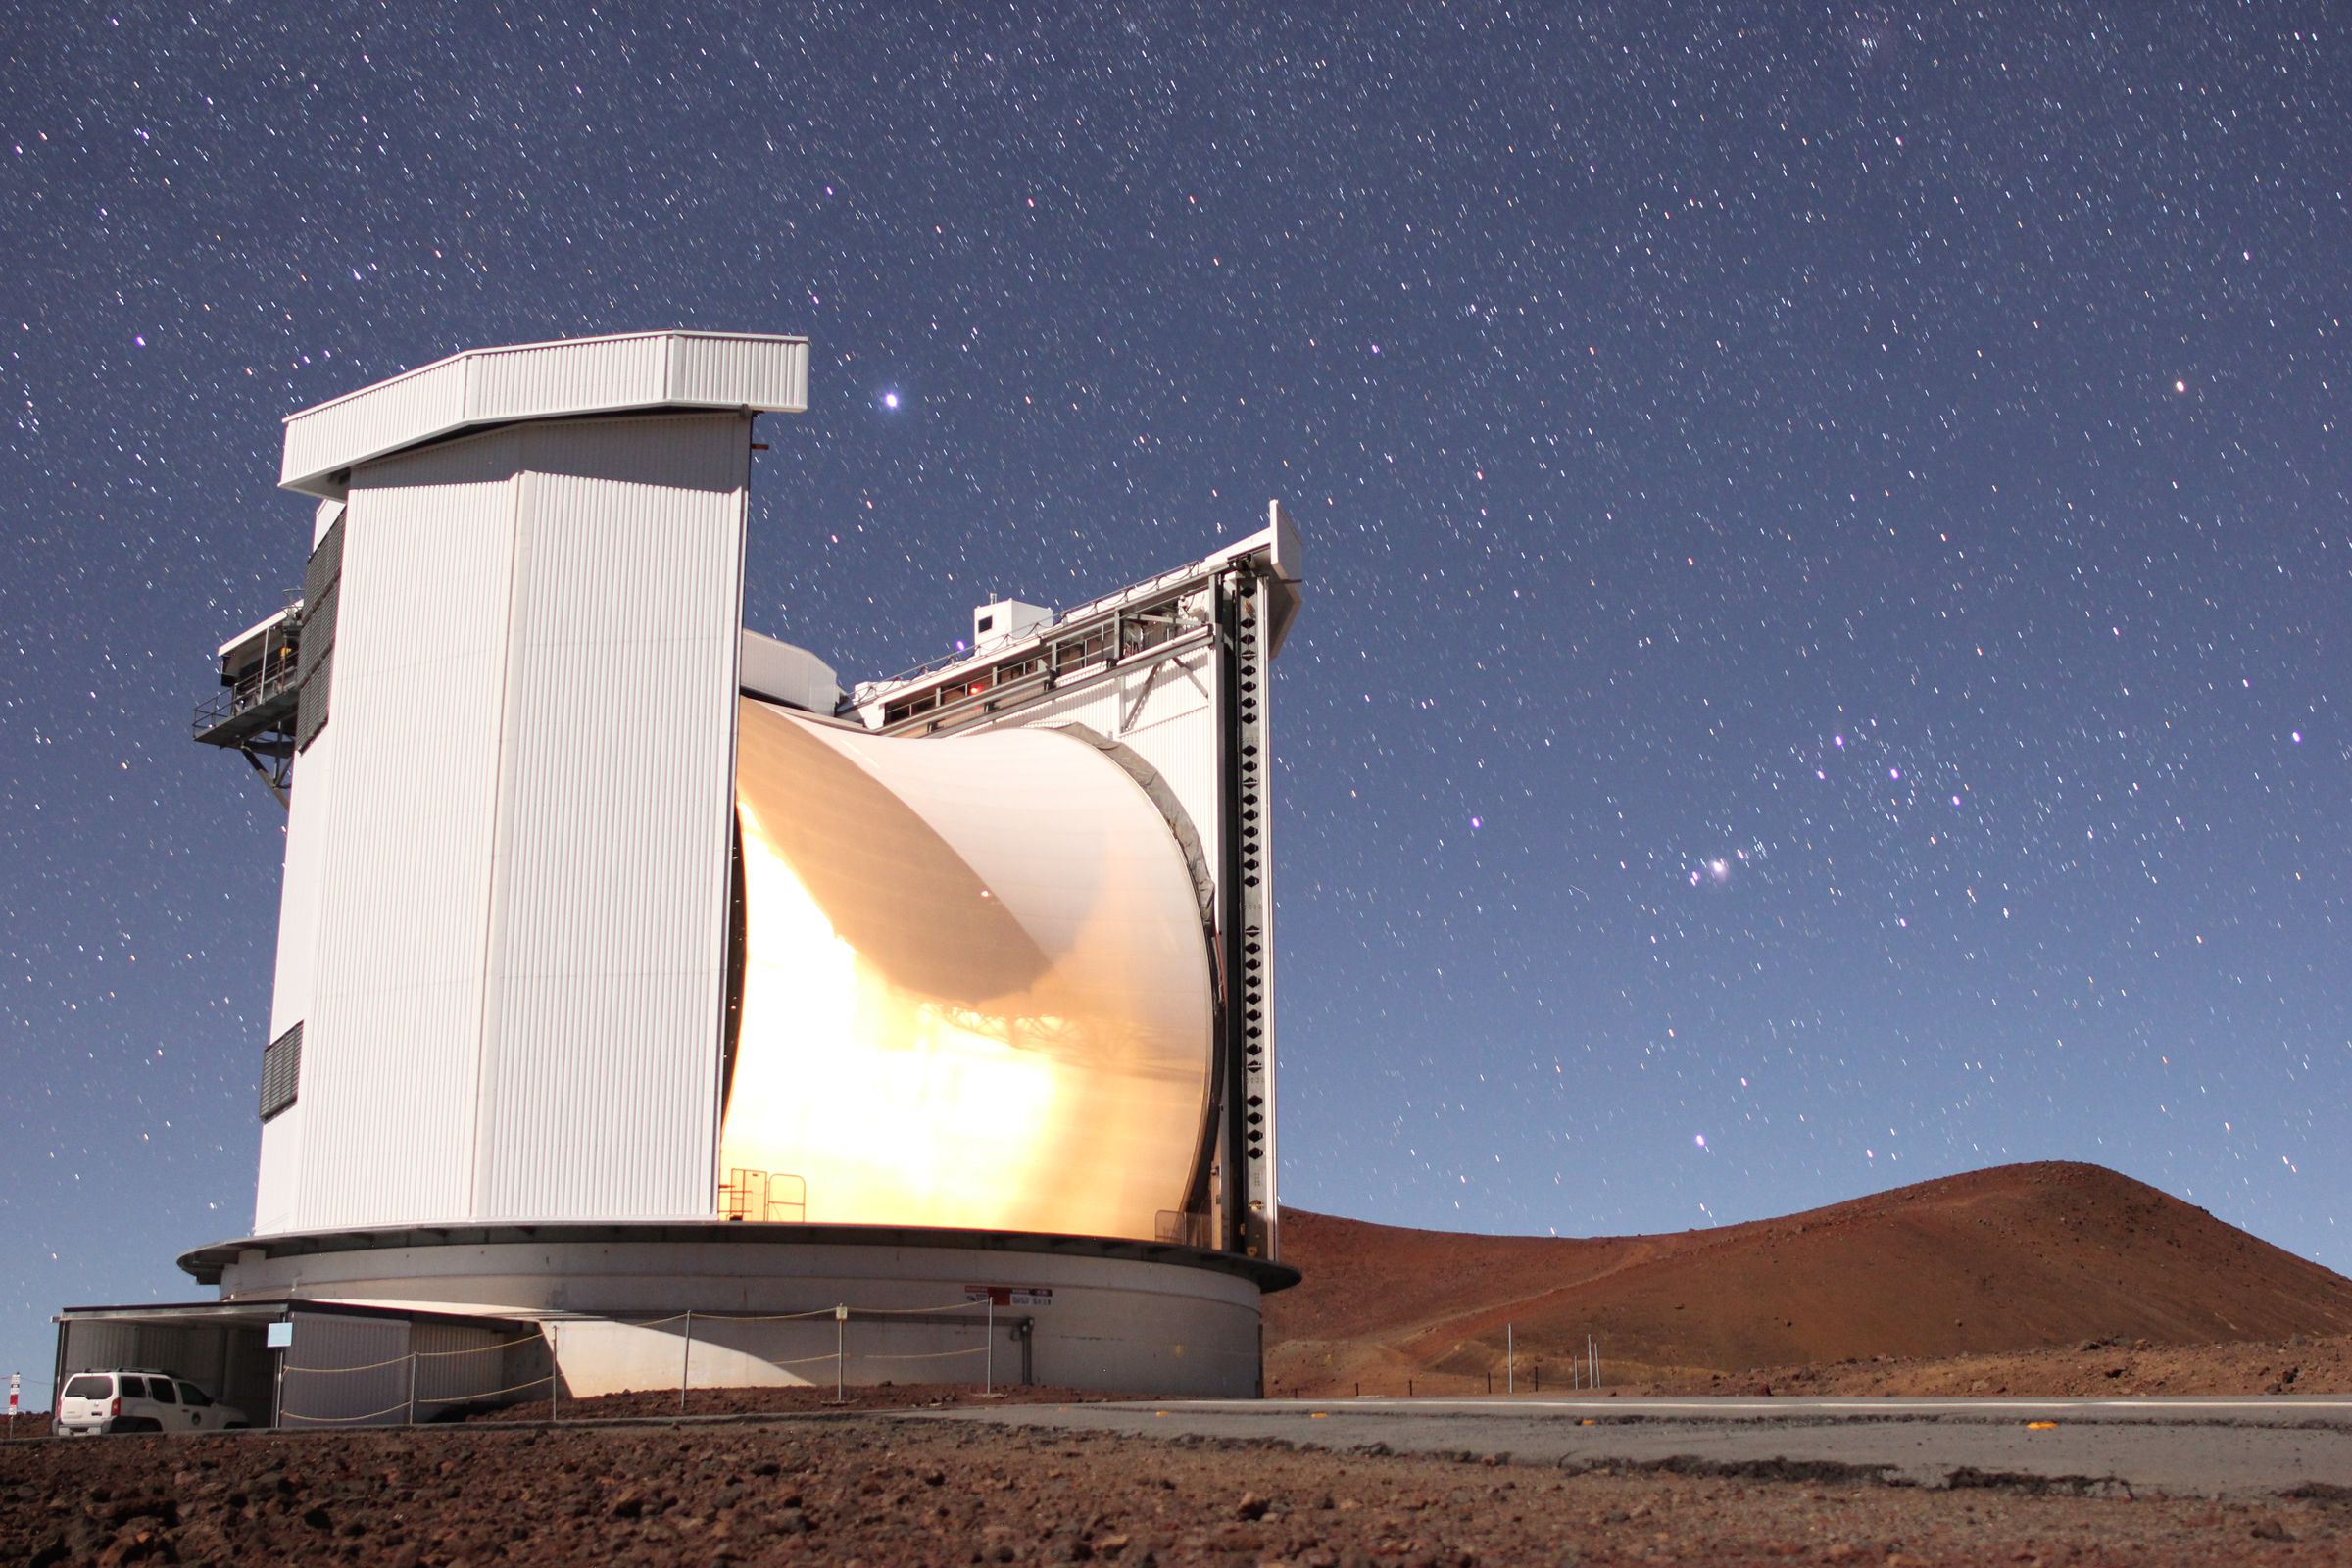 The James Clerk Maxwell Telescope in Hawaii, one of two telescopes used to make the phosphine detection on Venus.